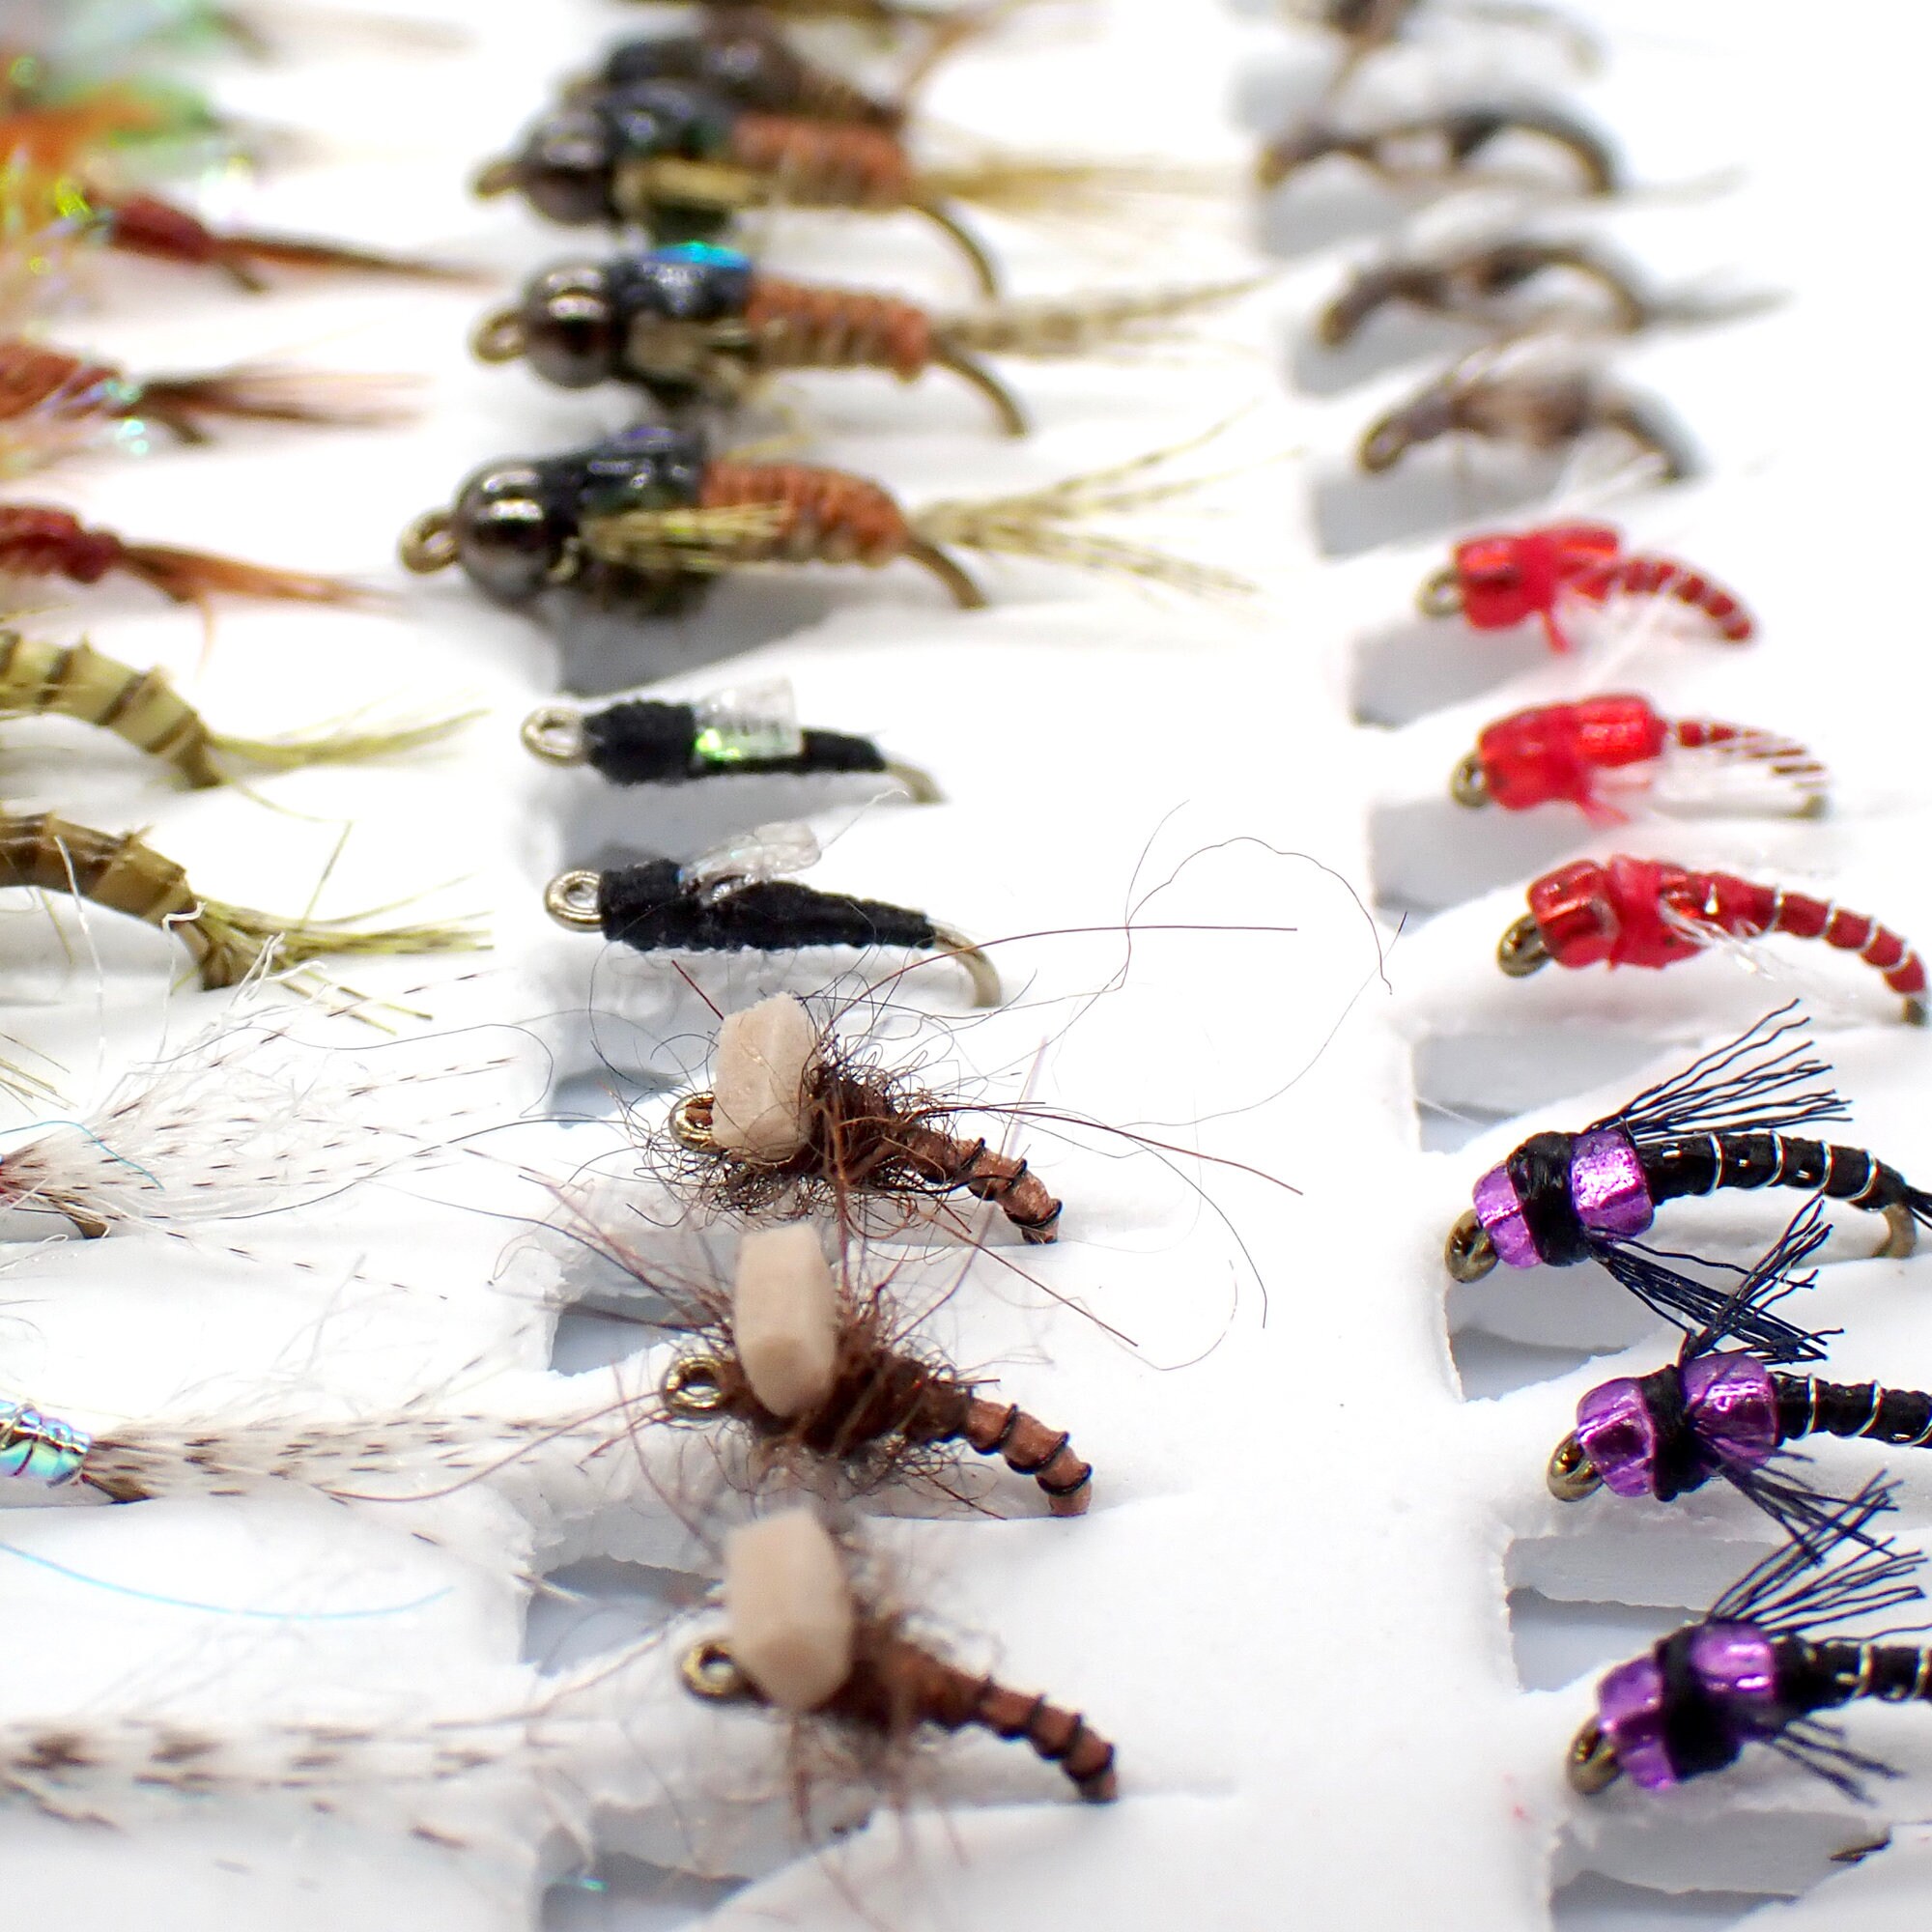 Parachute Ant Hi-viz Fly Fishing Ant Pattern Terrestrial Fly Pattern Trout  Flies Any Fly Patterns 3 Pack of Premium Flies -  Hong Kong